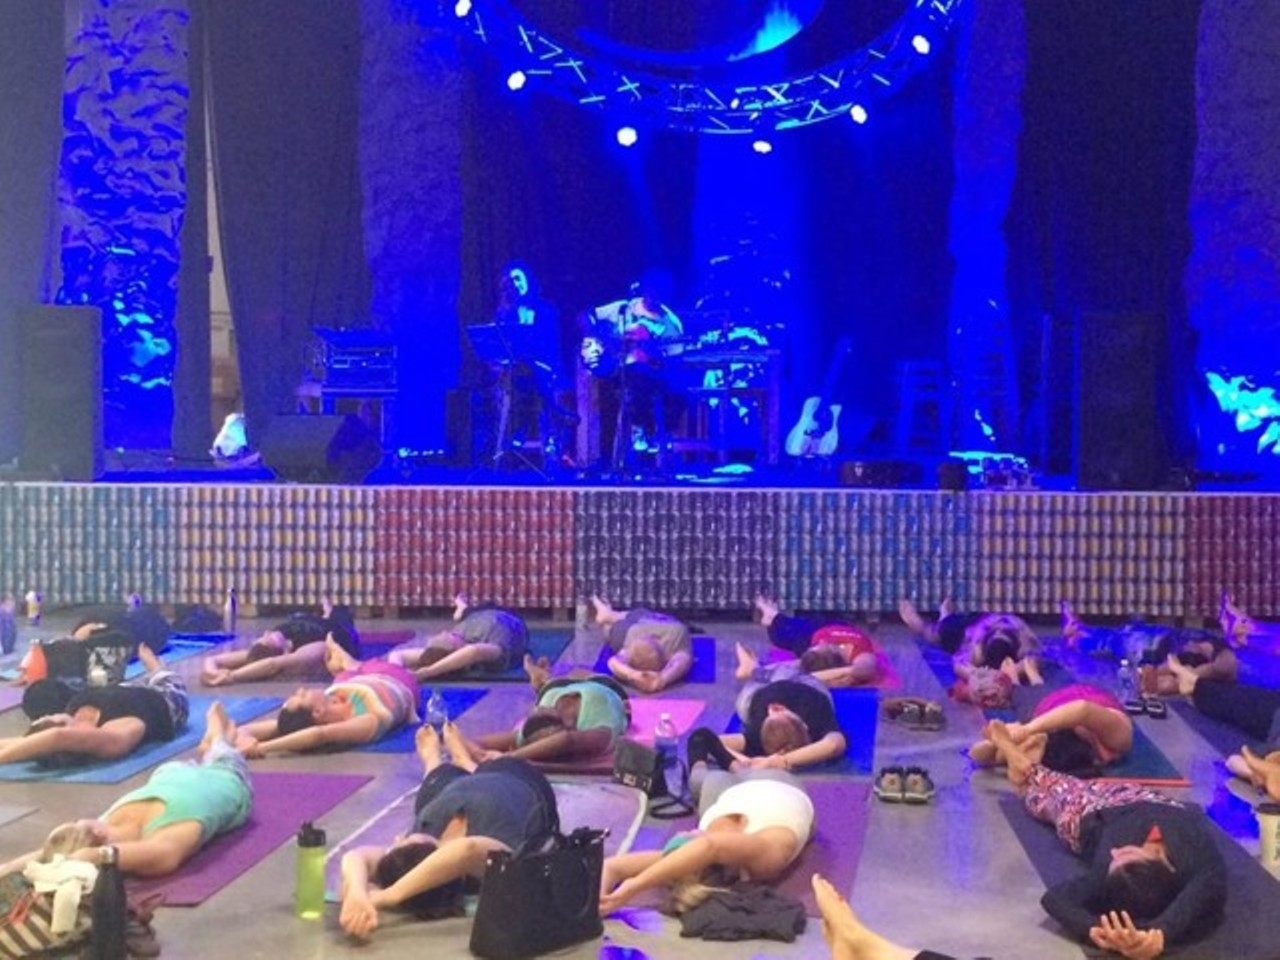 Yoga on Tap at 3 Daughters Brewing
222 22nd St. S., St. Petersburg
Wednesday, 6 p.m.
Photo via The Body Electric